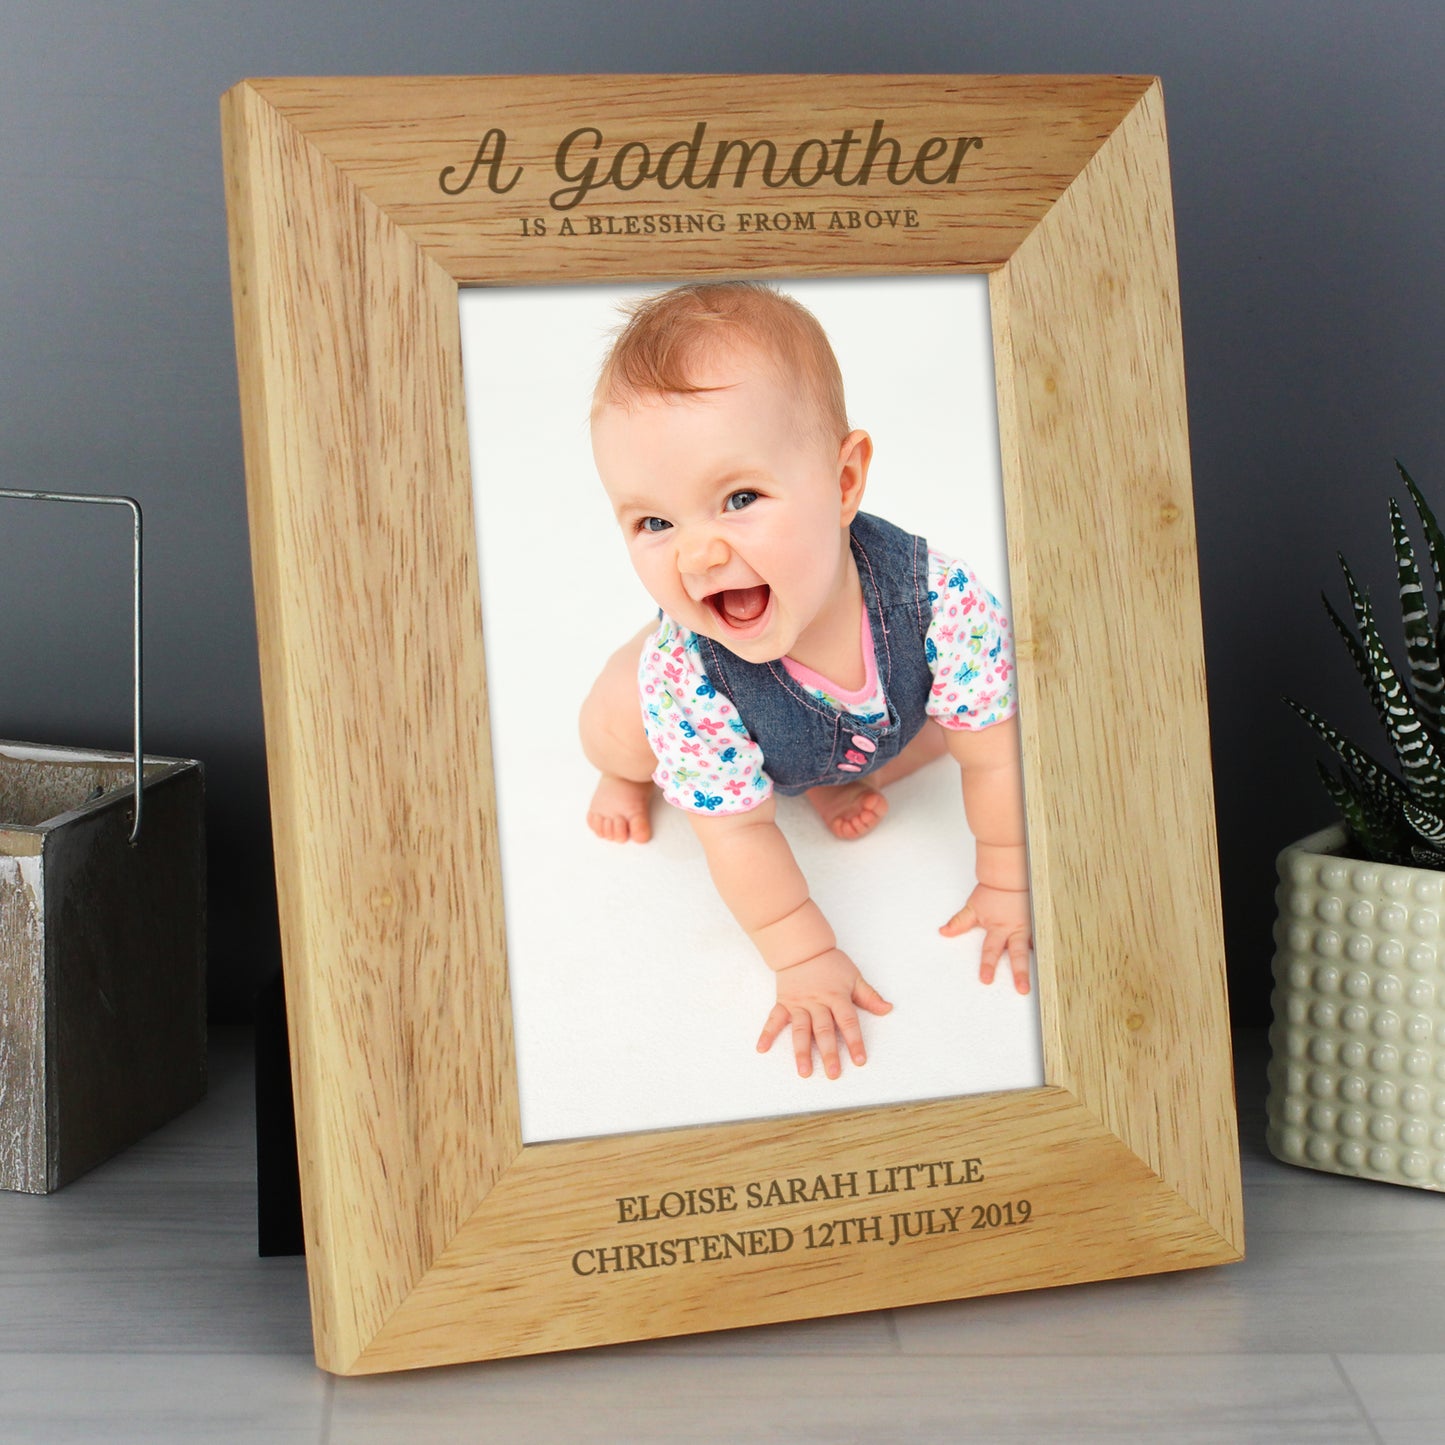 Personalised Godmother 5x7 Wooden Photo Frame - Personalise It!